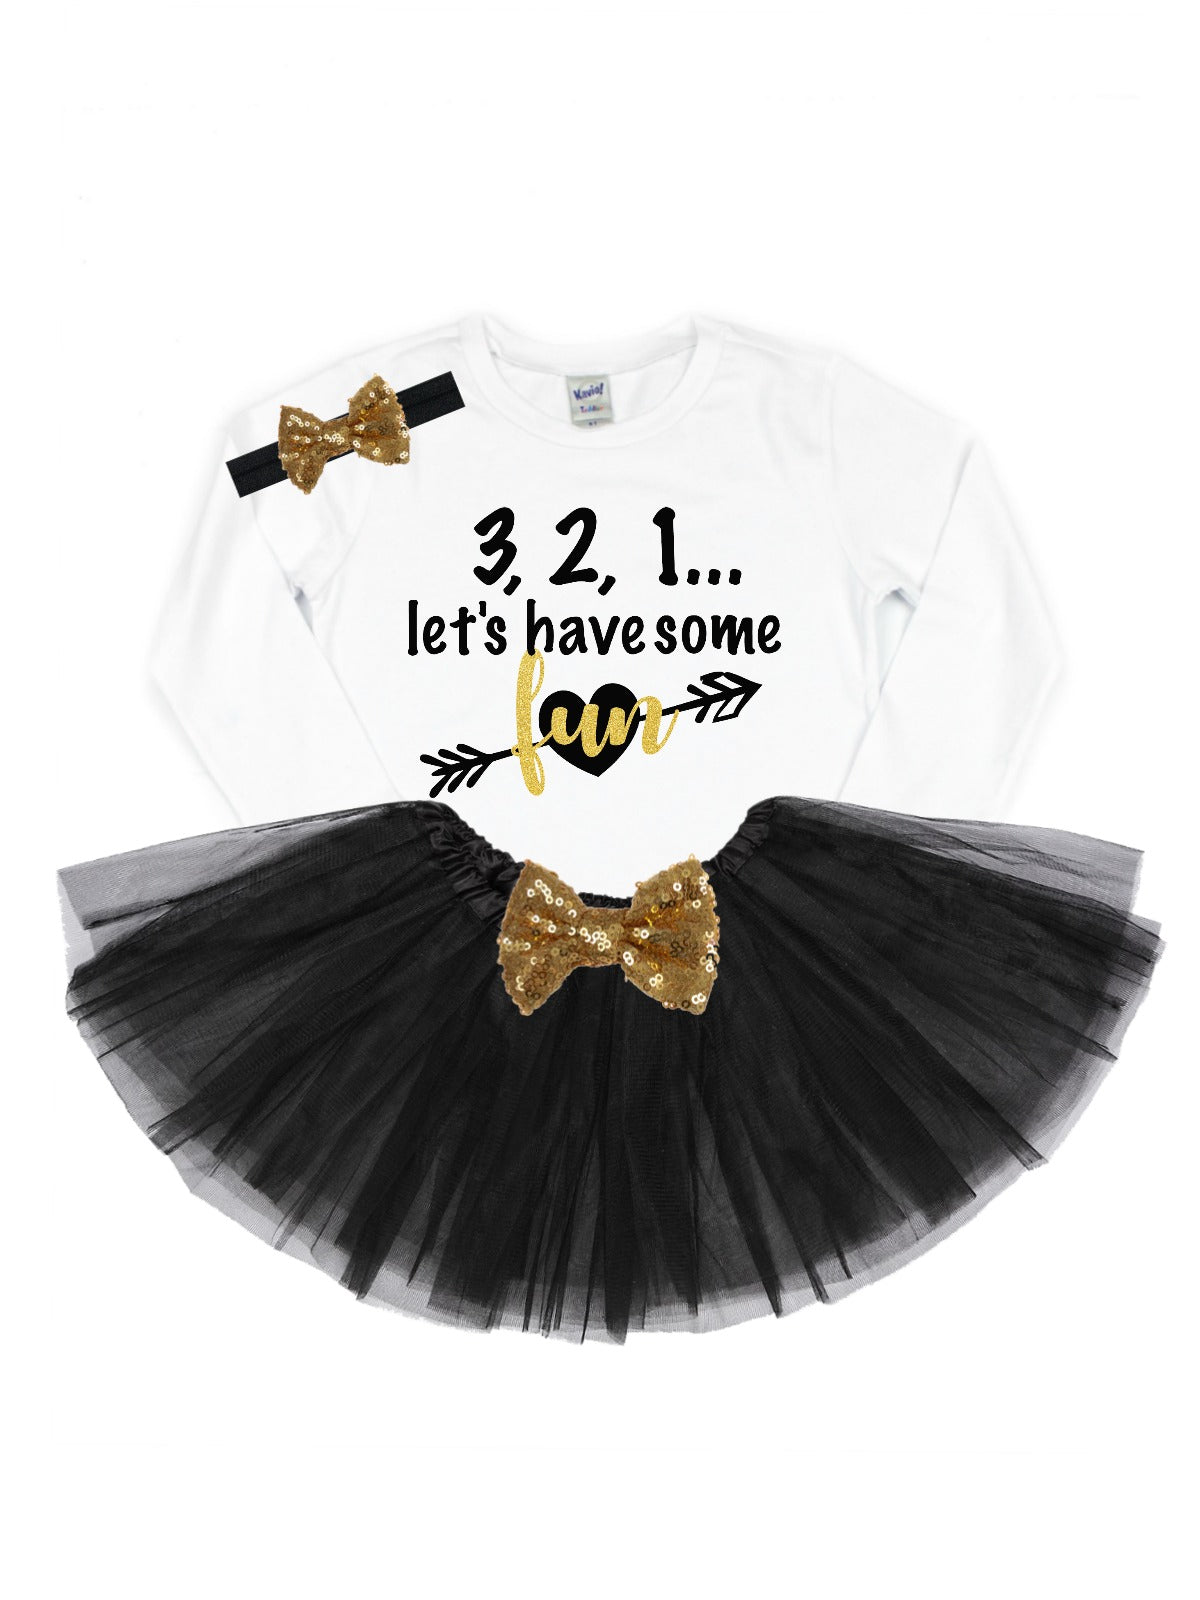 new years countdown girls tutu outfit